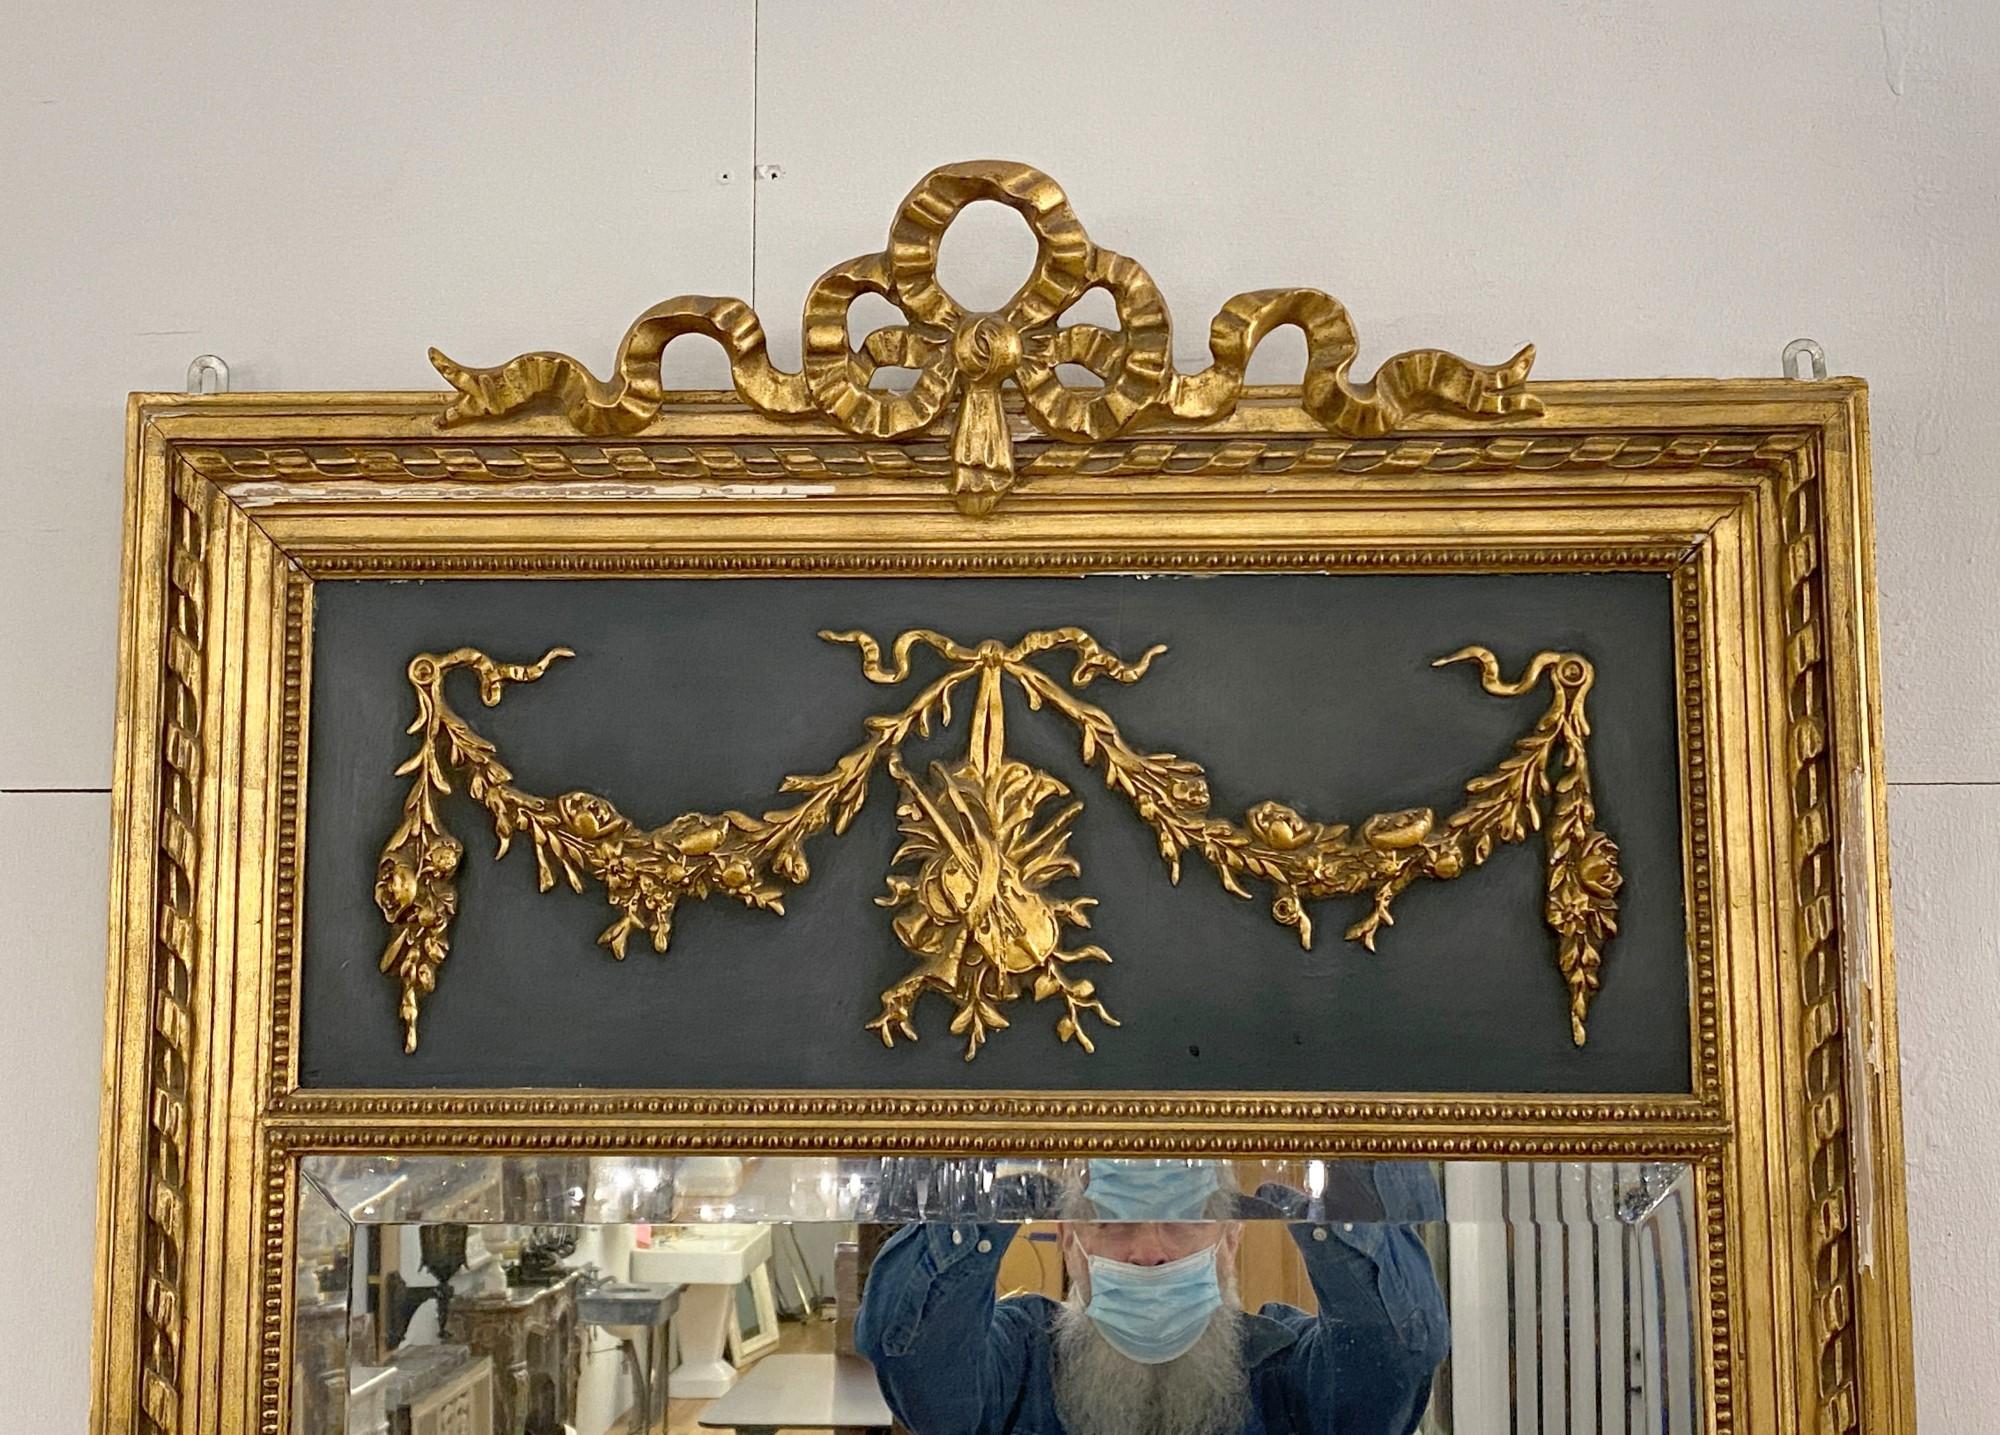 1880s French trumeau mirror with beveled glass and gilded wood, Featuring a ribbon detail on top. The top panel is painted dark green and detailed with a delicate ribbon and violin motif. This can be seen at our 333 West 52nd St location in the